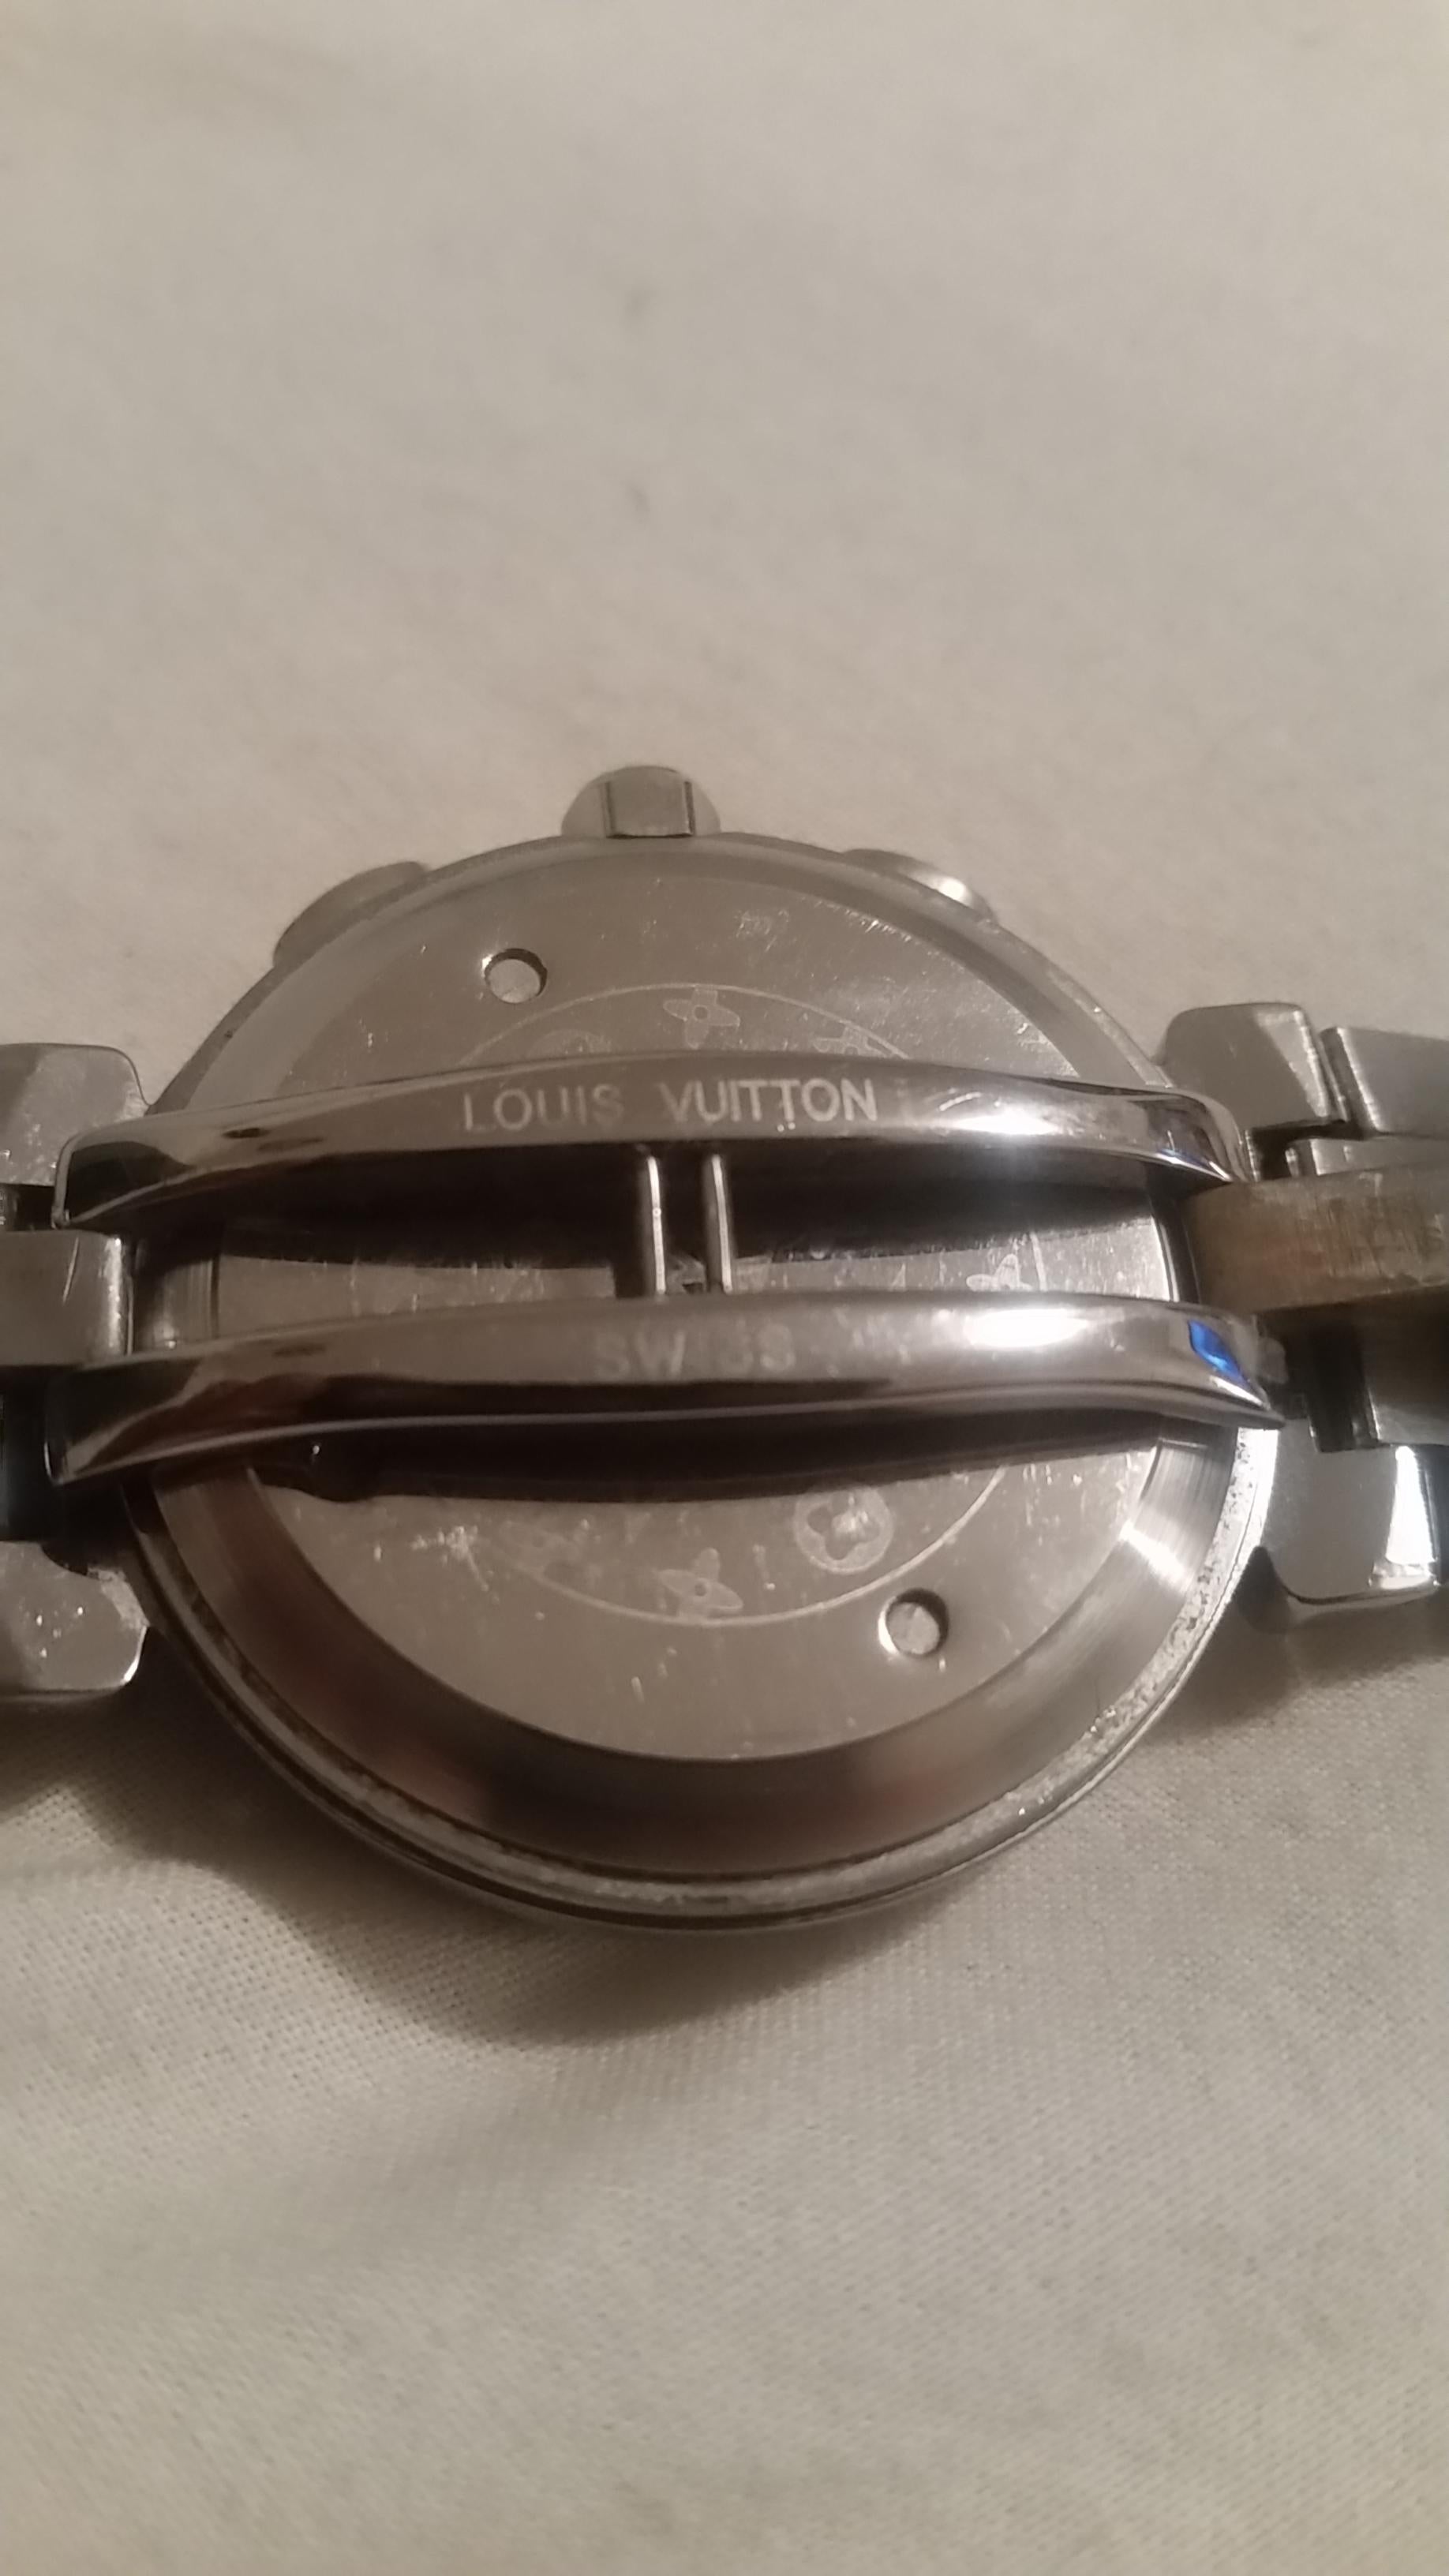 How to Identify Fake Louis Vuitton Watches